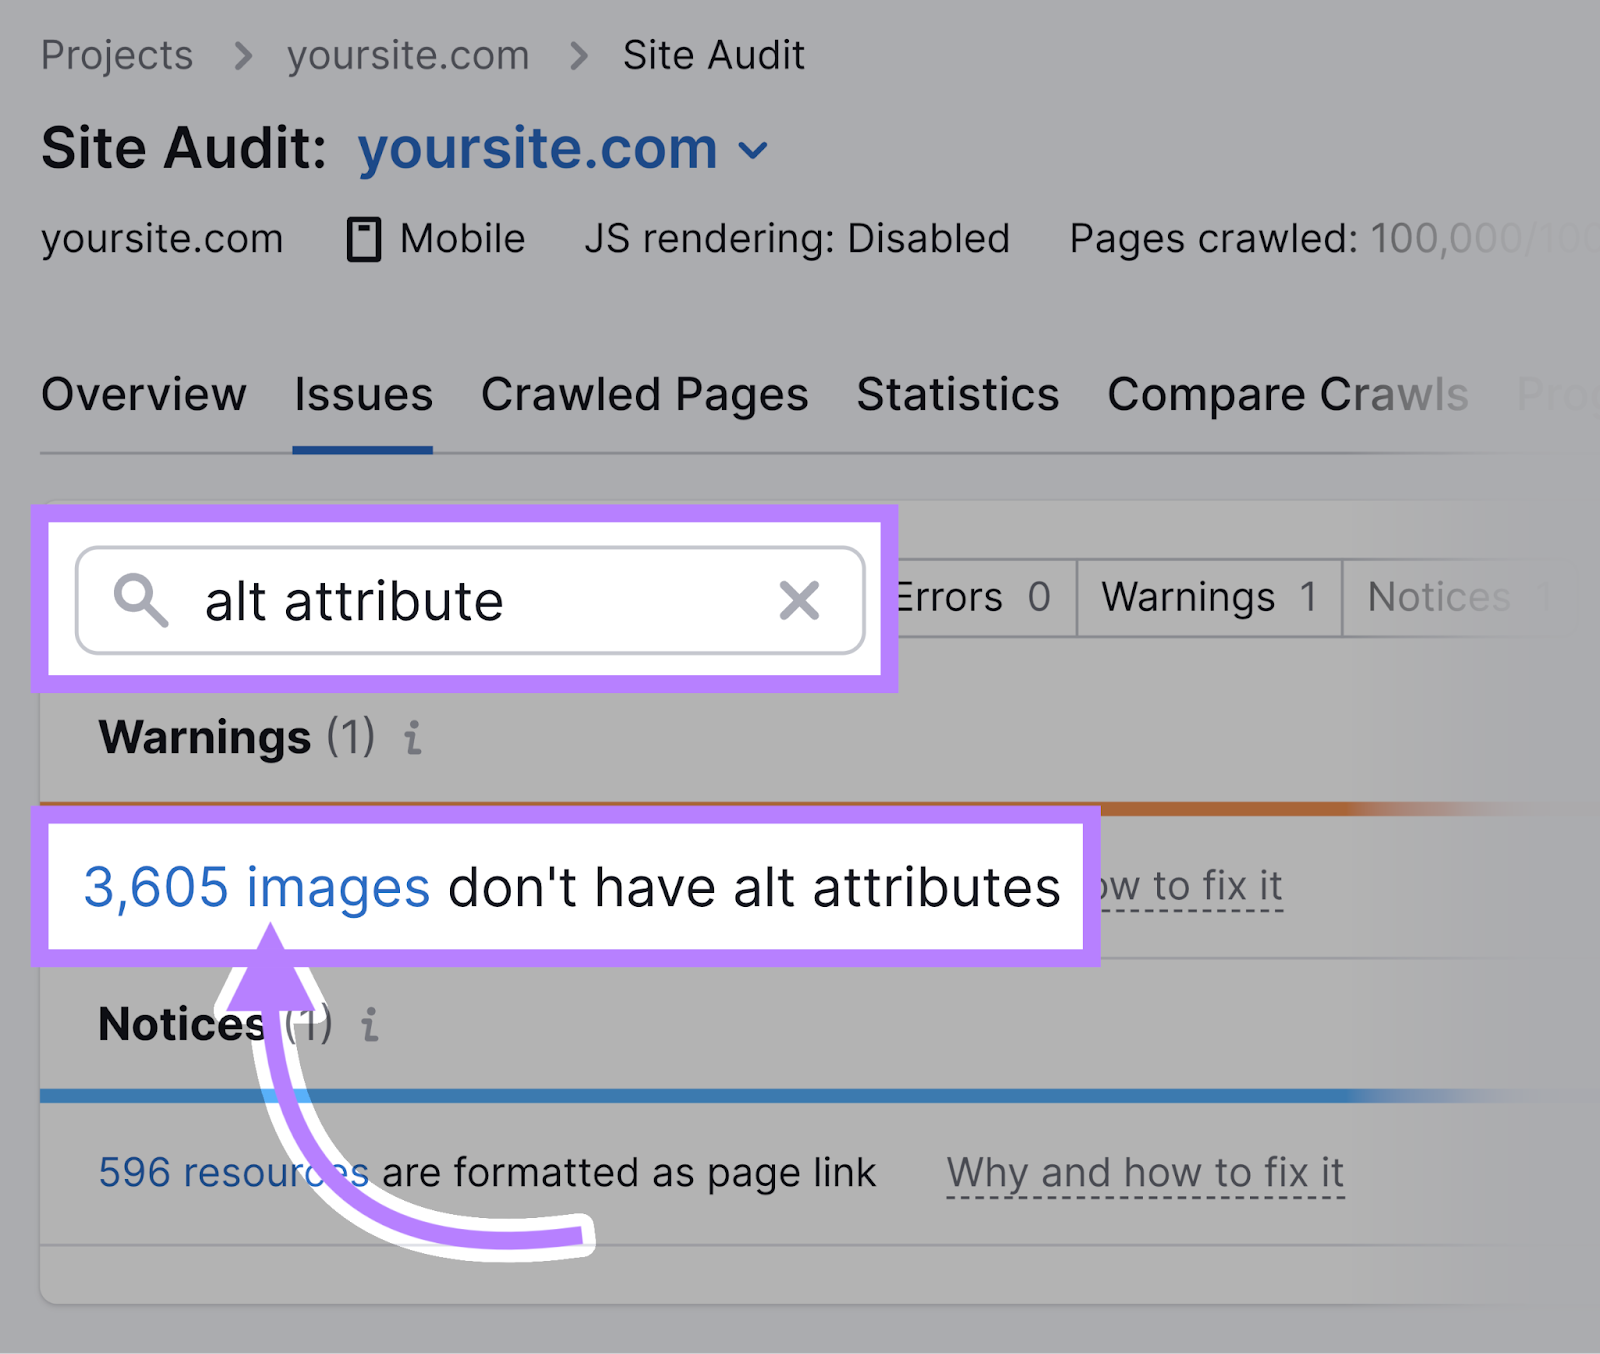 search for "alt attribute" in the "Issues" section of Site Audit found 3,605 images without alt attribute